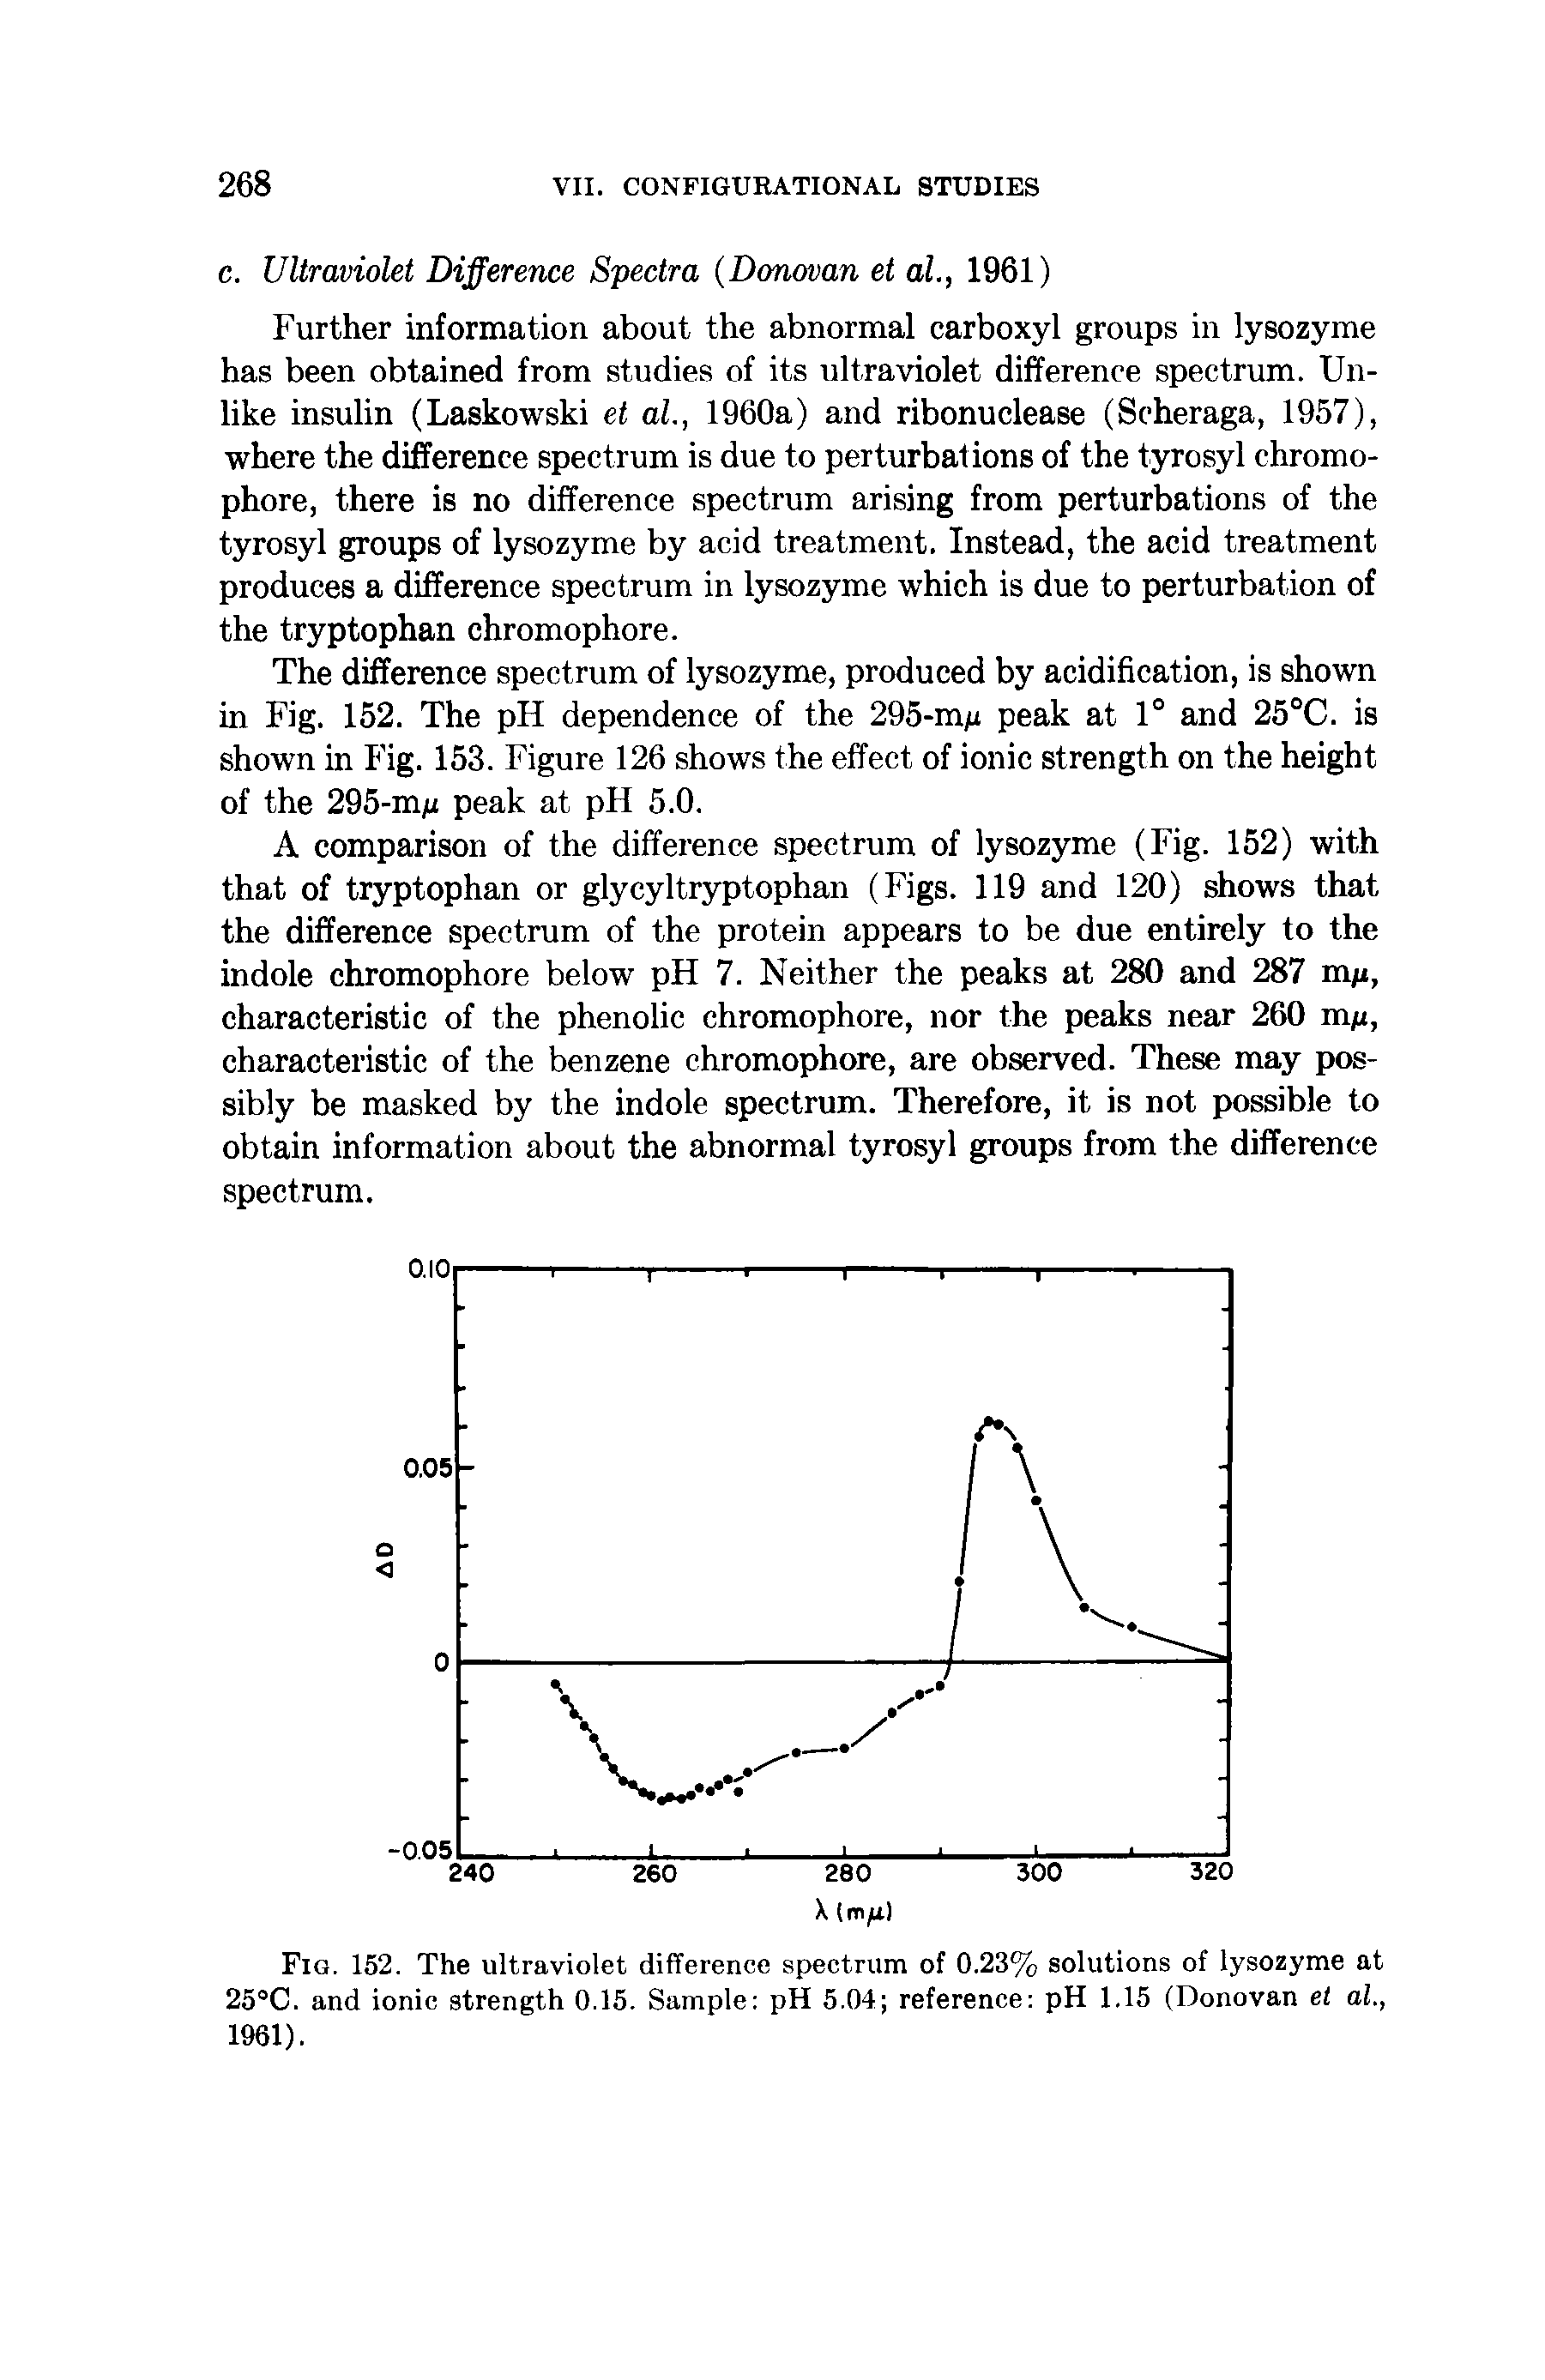 Fig. 152. The ultraviolet difference spectrum of 0.23% solutions of lysozyme at 25°C. and ionic strength 0.15. Sample pH 5.04 reference pH 1.15 (Donovan et al., 1961).